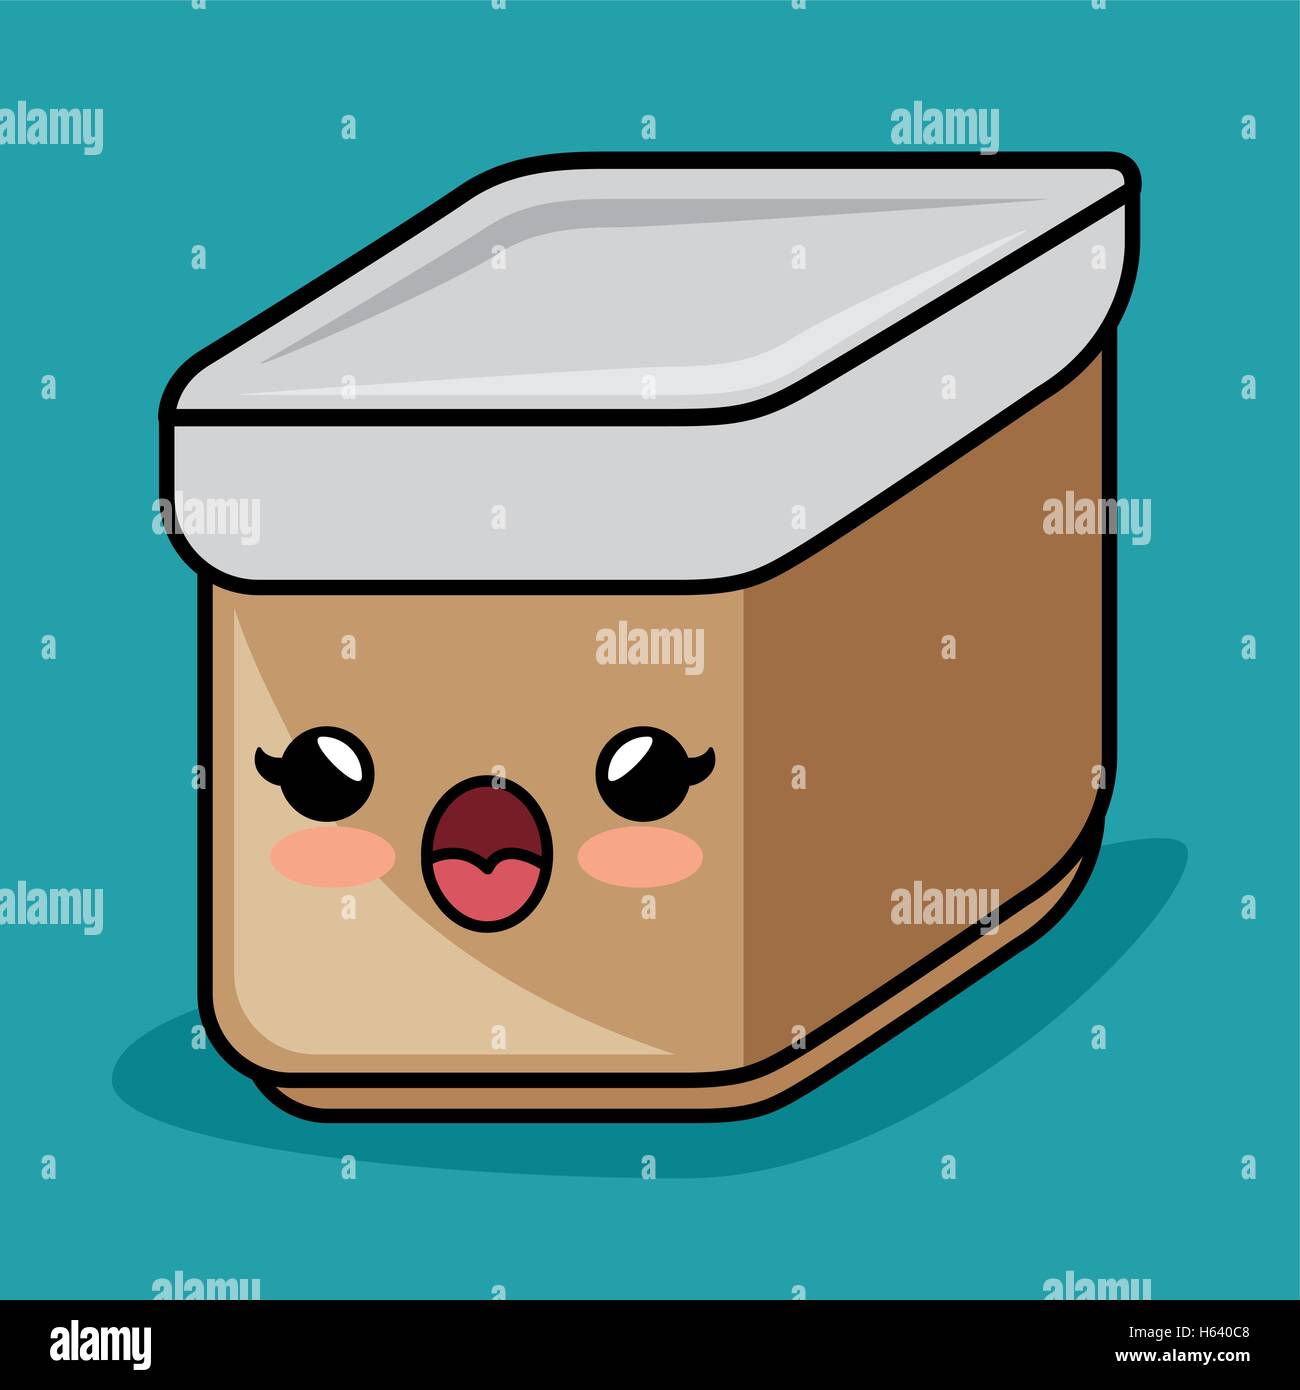 kawaii container kitchen icon graphic Stock Vector